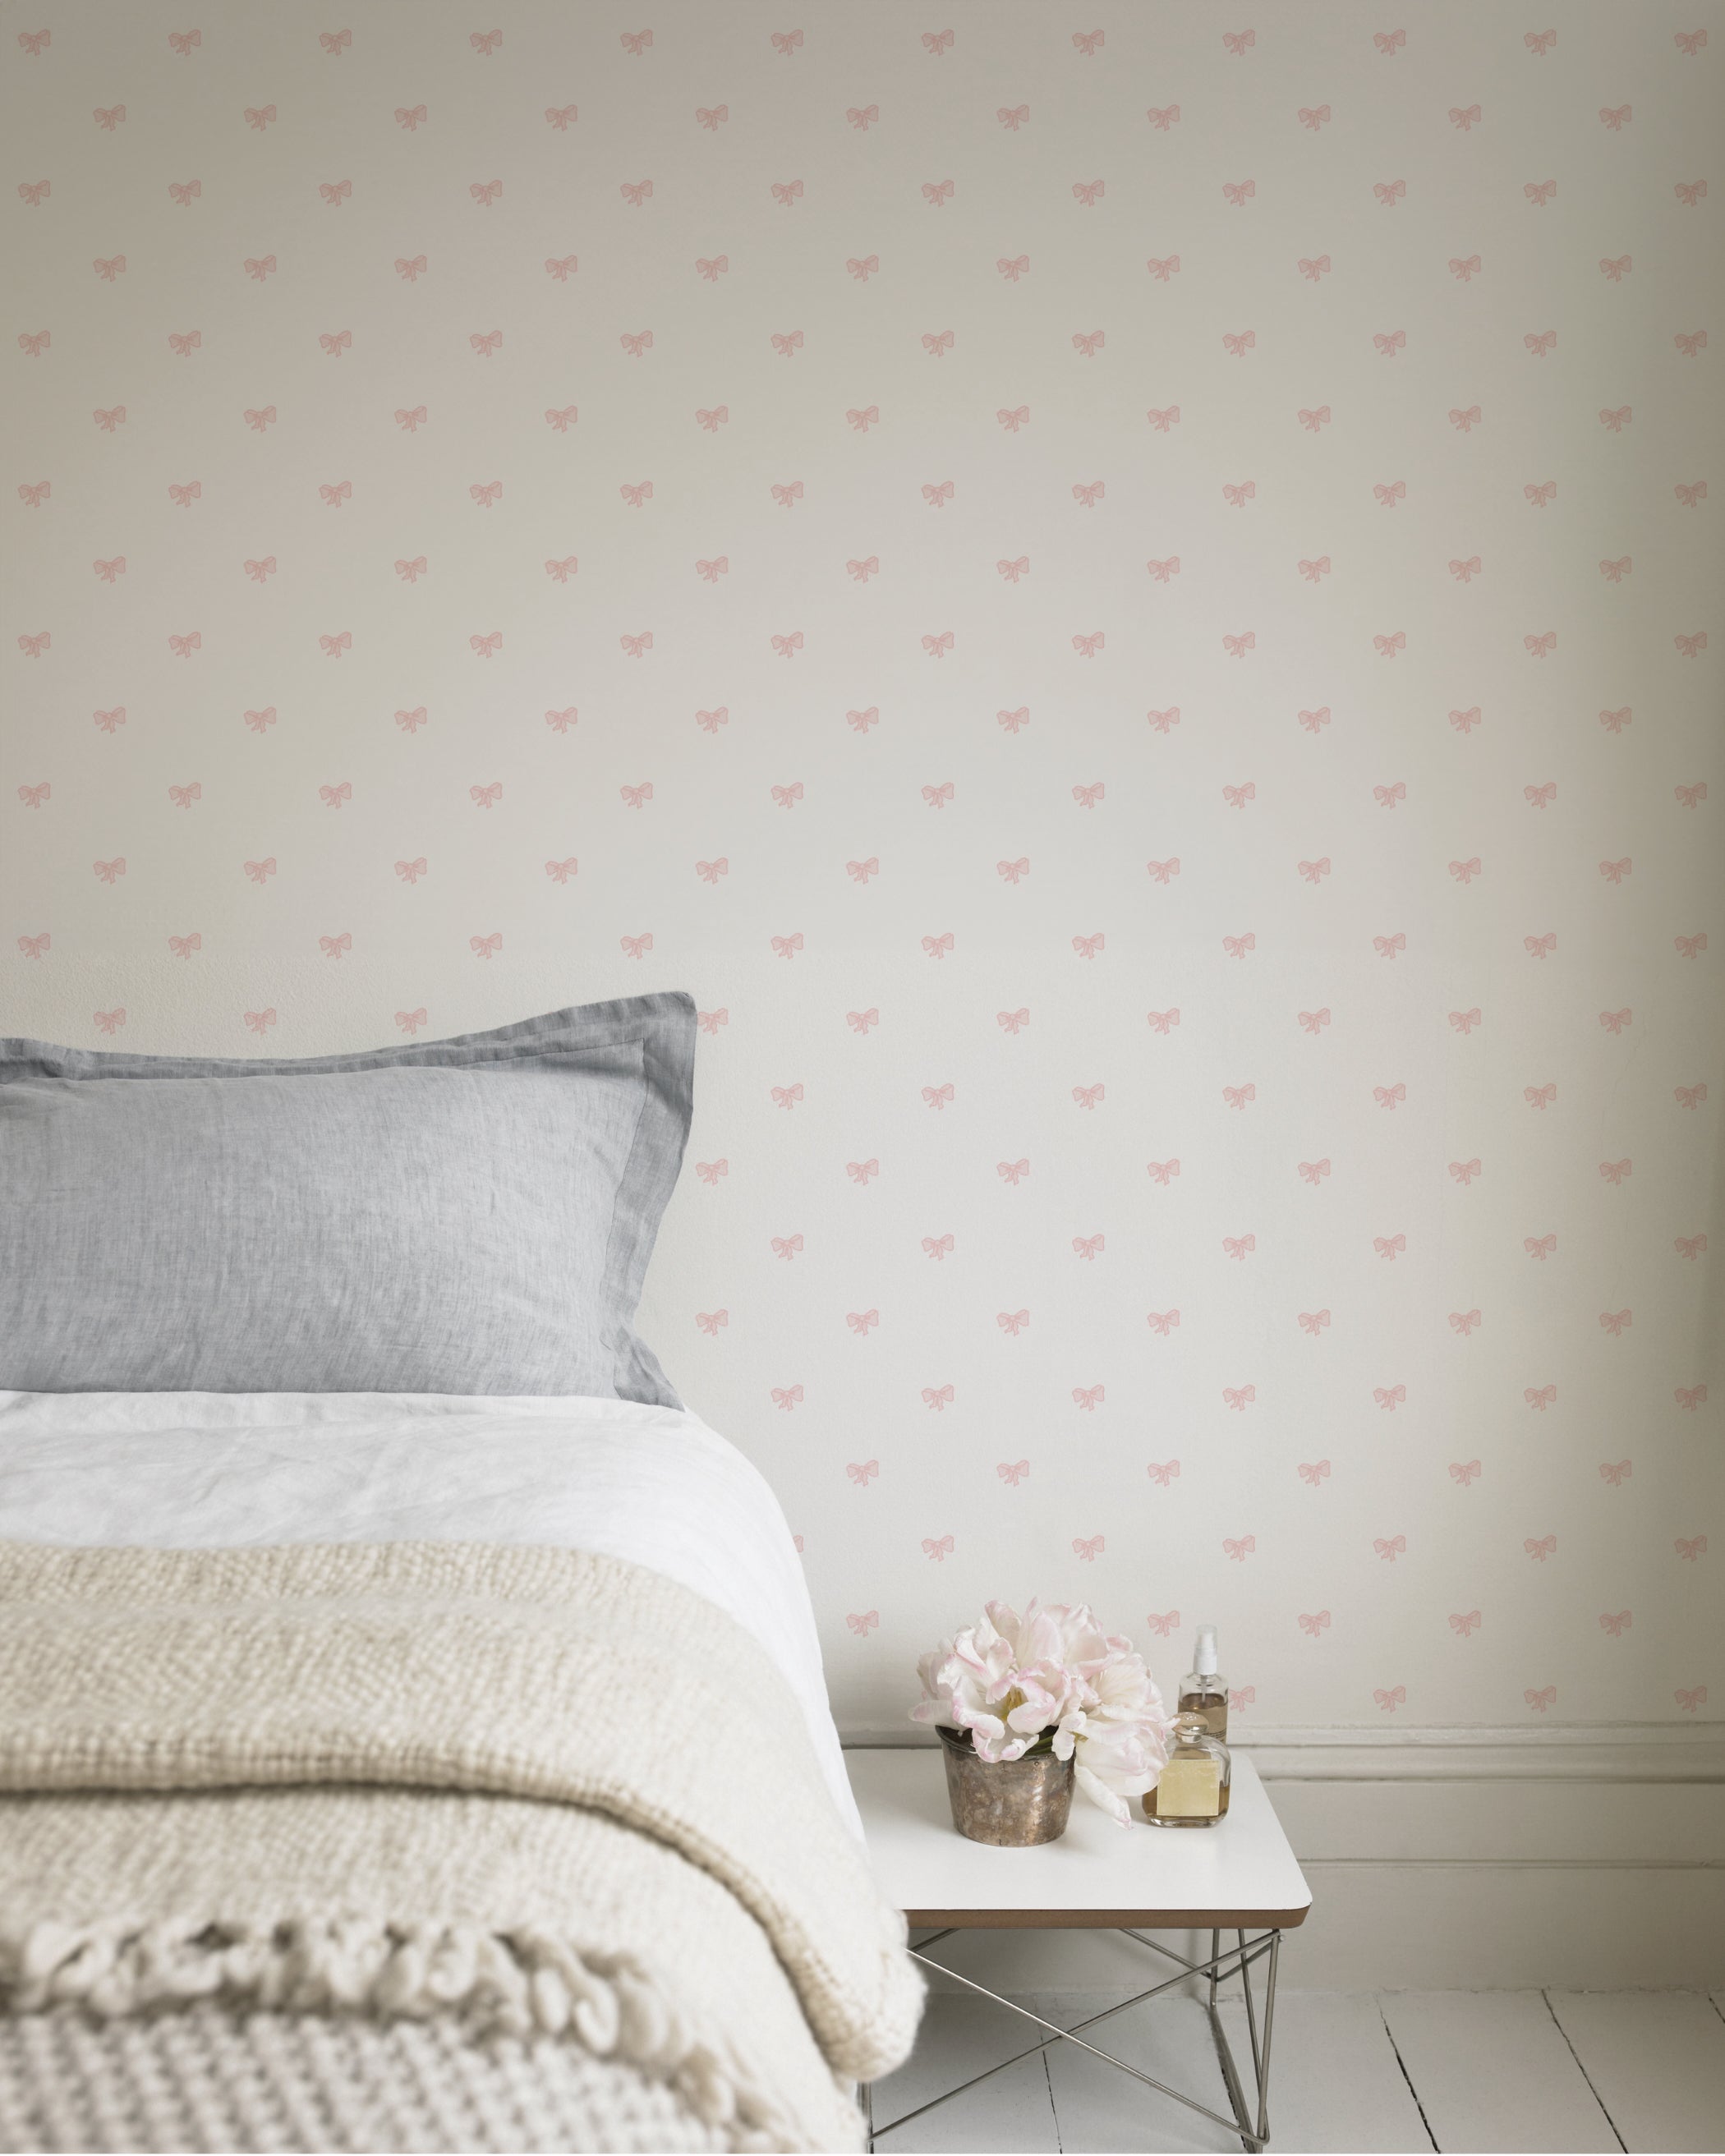 A serene bedroom decorated with the Tiny Bows Wallpaper, which has small pink bows on a light background. The decor includes a cozy bed with a gray linen, a small bedside table with a floral arrangement, and a soft knitted throw, creating a gentle and inviting atmosphere.